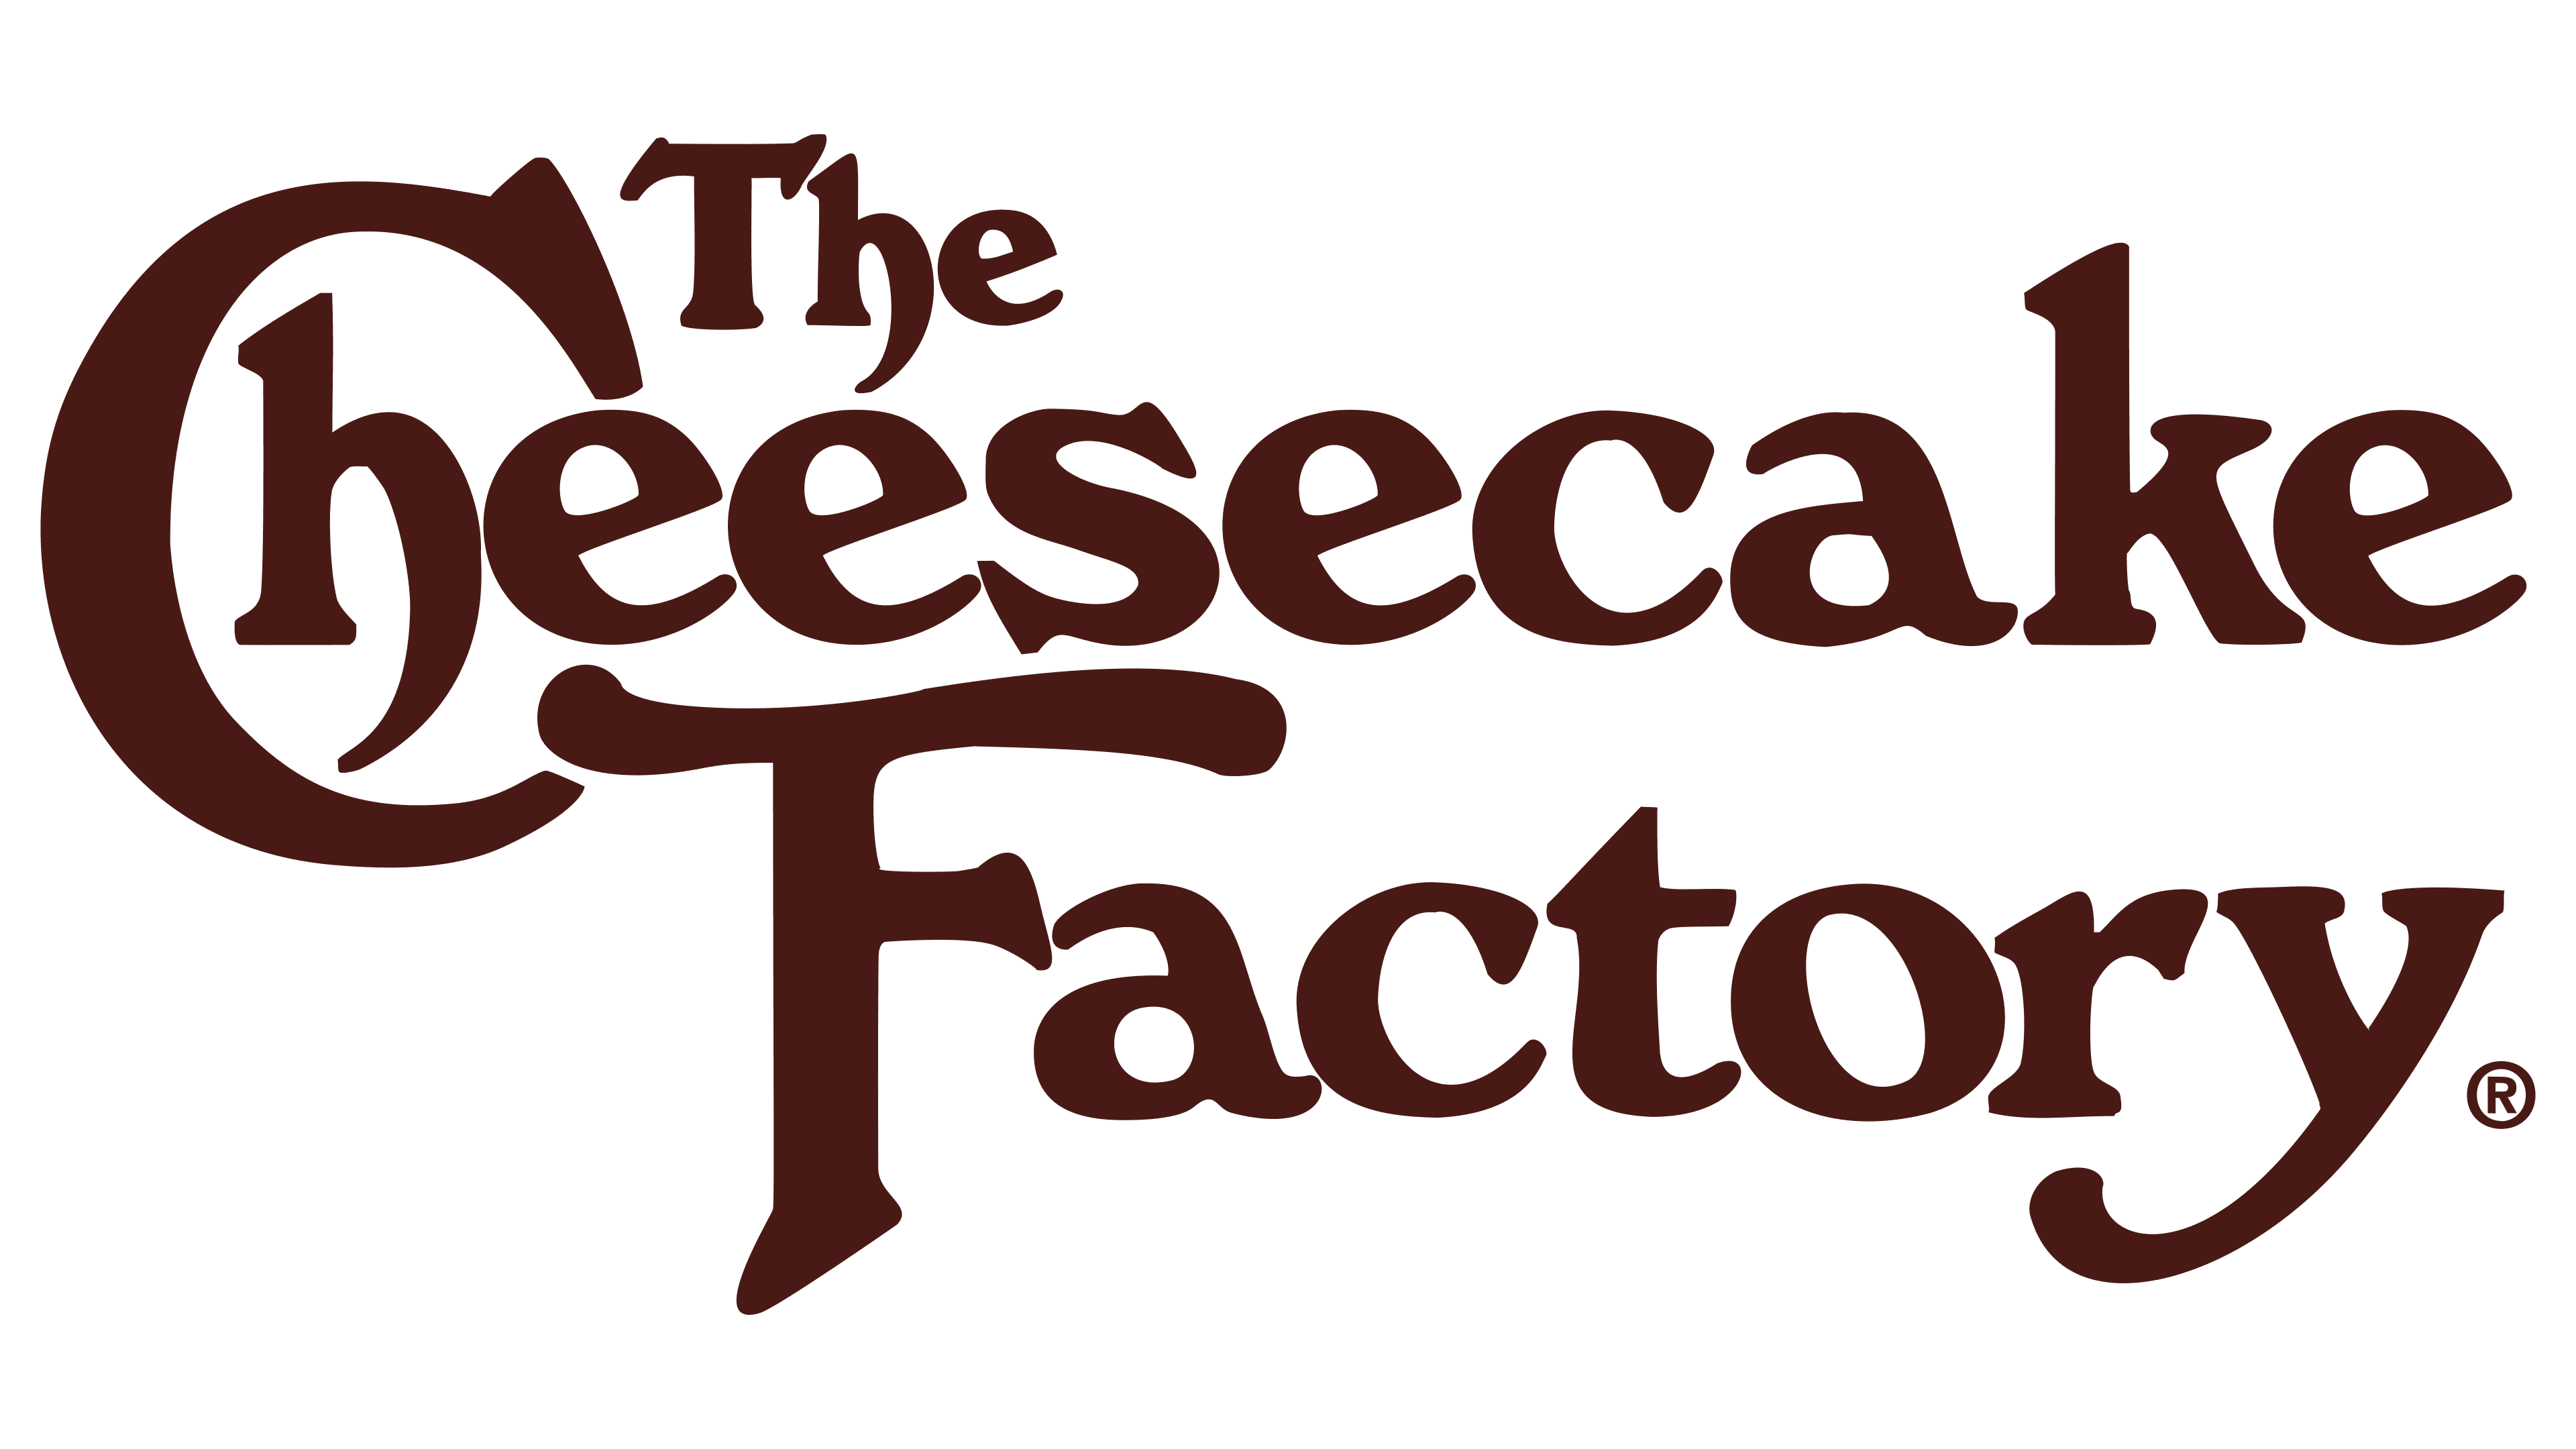 Cheesecake Factory Coupons Logo